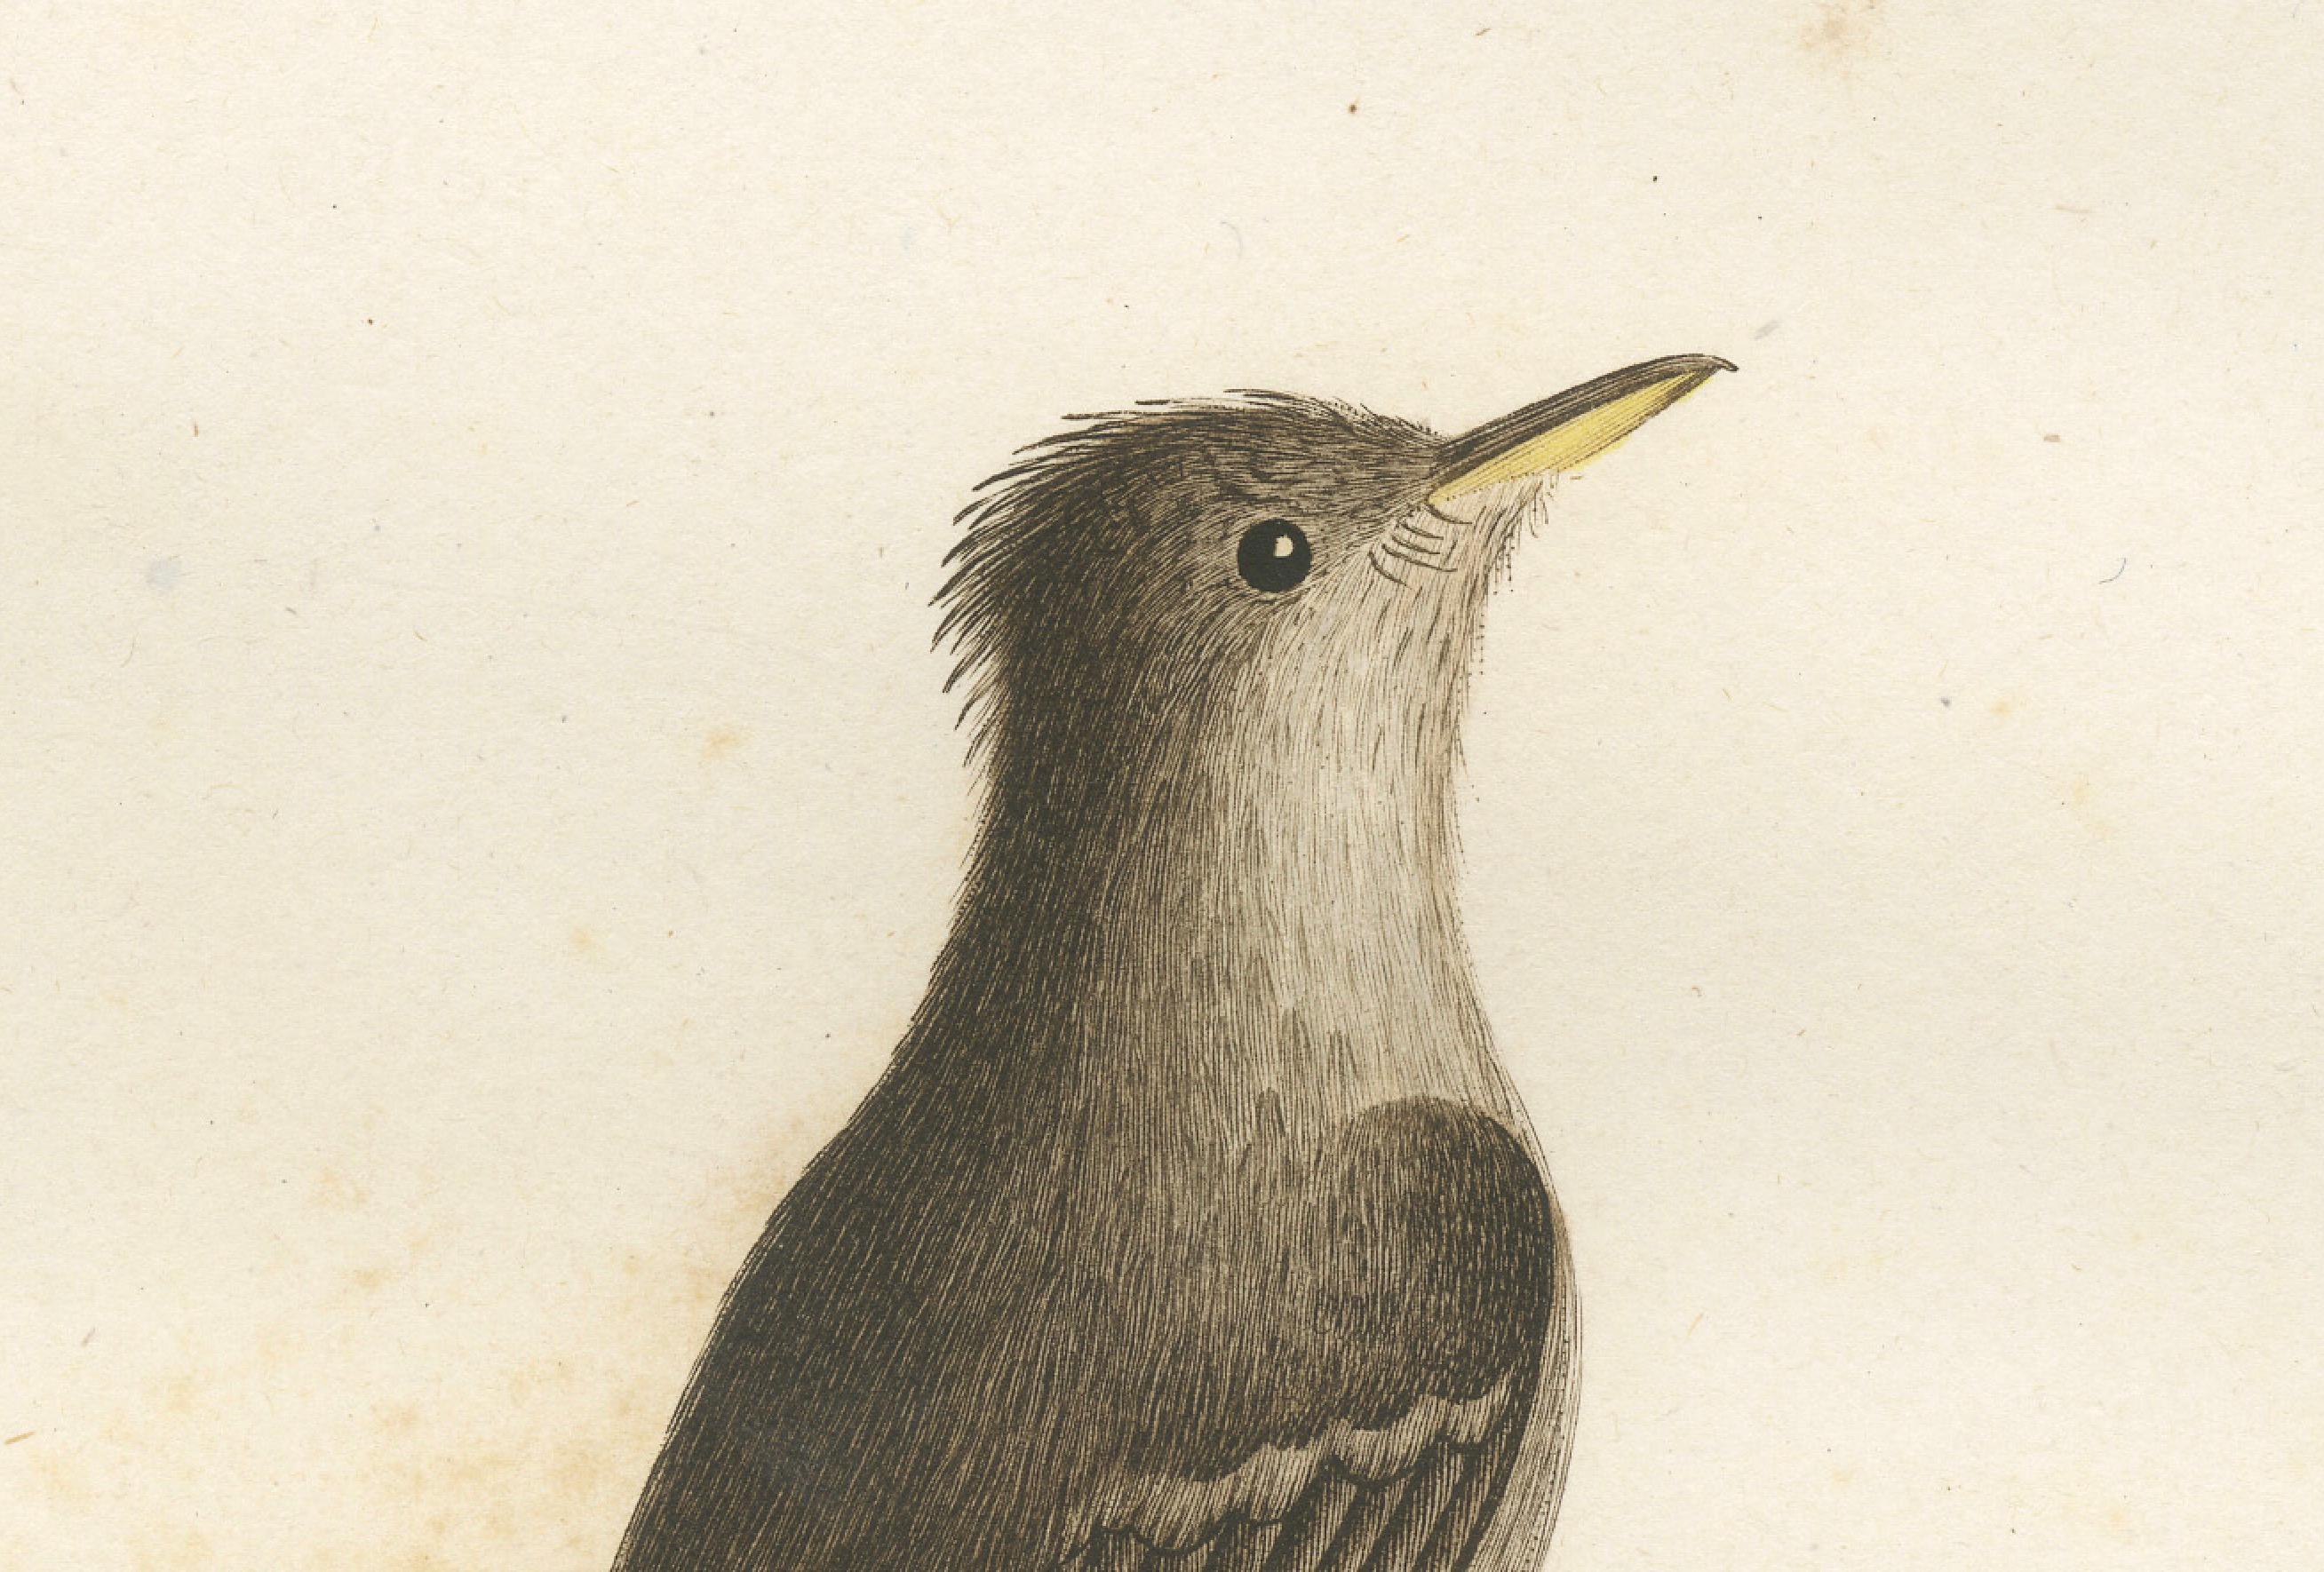 This vintage image is a handcolored antique print of an eastern wood pewee, also known as 'Le Moucherolle plaintif'. The bird is depicted perched on a branch, shown in profile facing left. It features delicate coloring with a predominance of gray